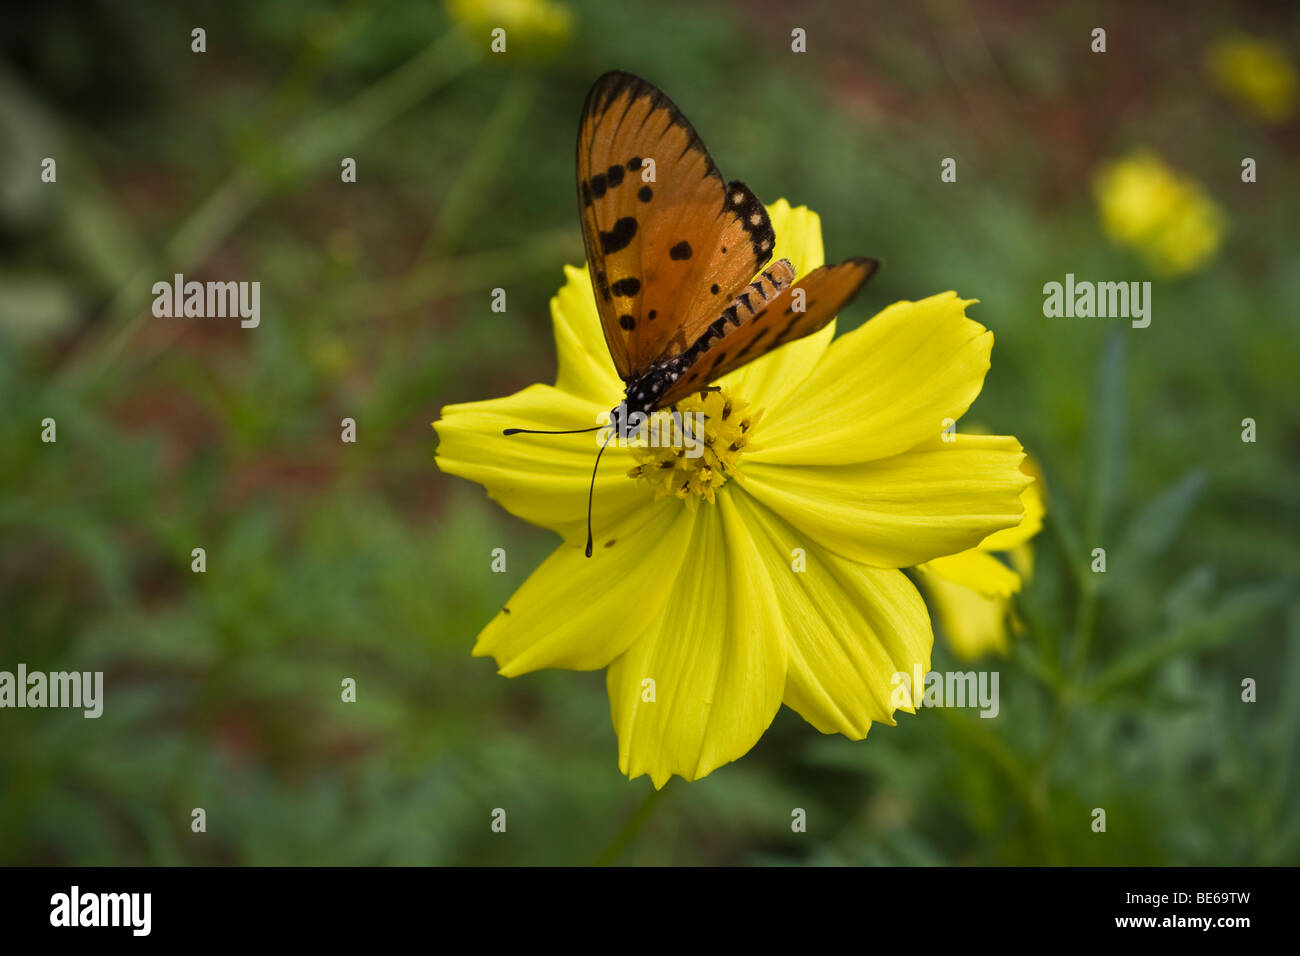 A butterfly sitting on a flower Stock Photo